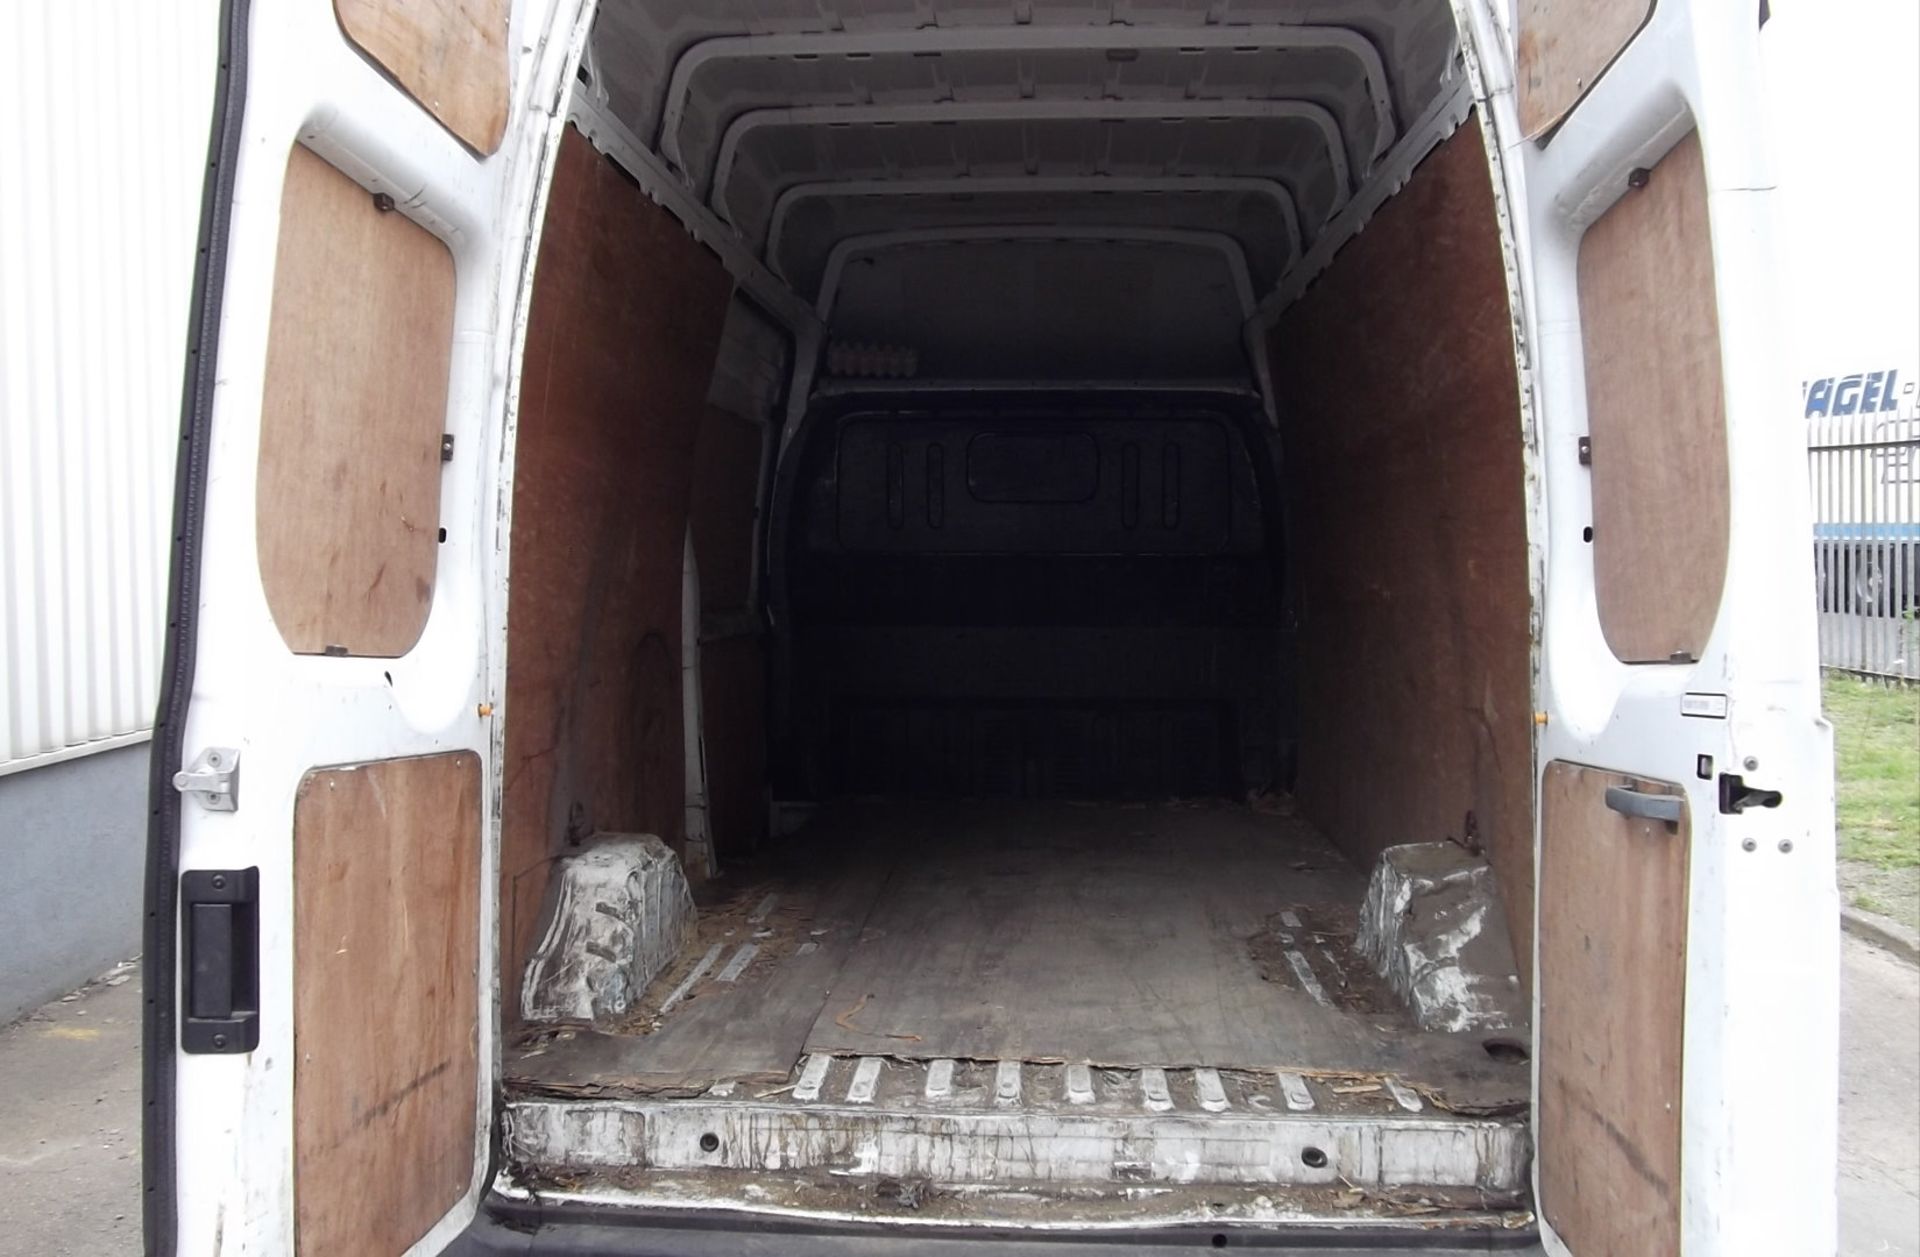 2013 Ford Transit 350 125 LWB MR Panel Van - CL505 - NO VAT ON THE HAMMER - Location: Corby, Northam - Image 3 of 8